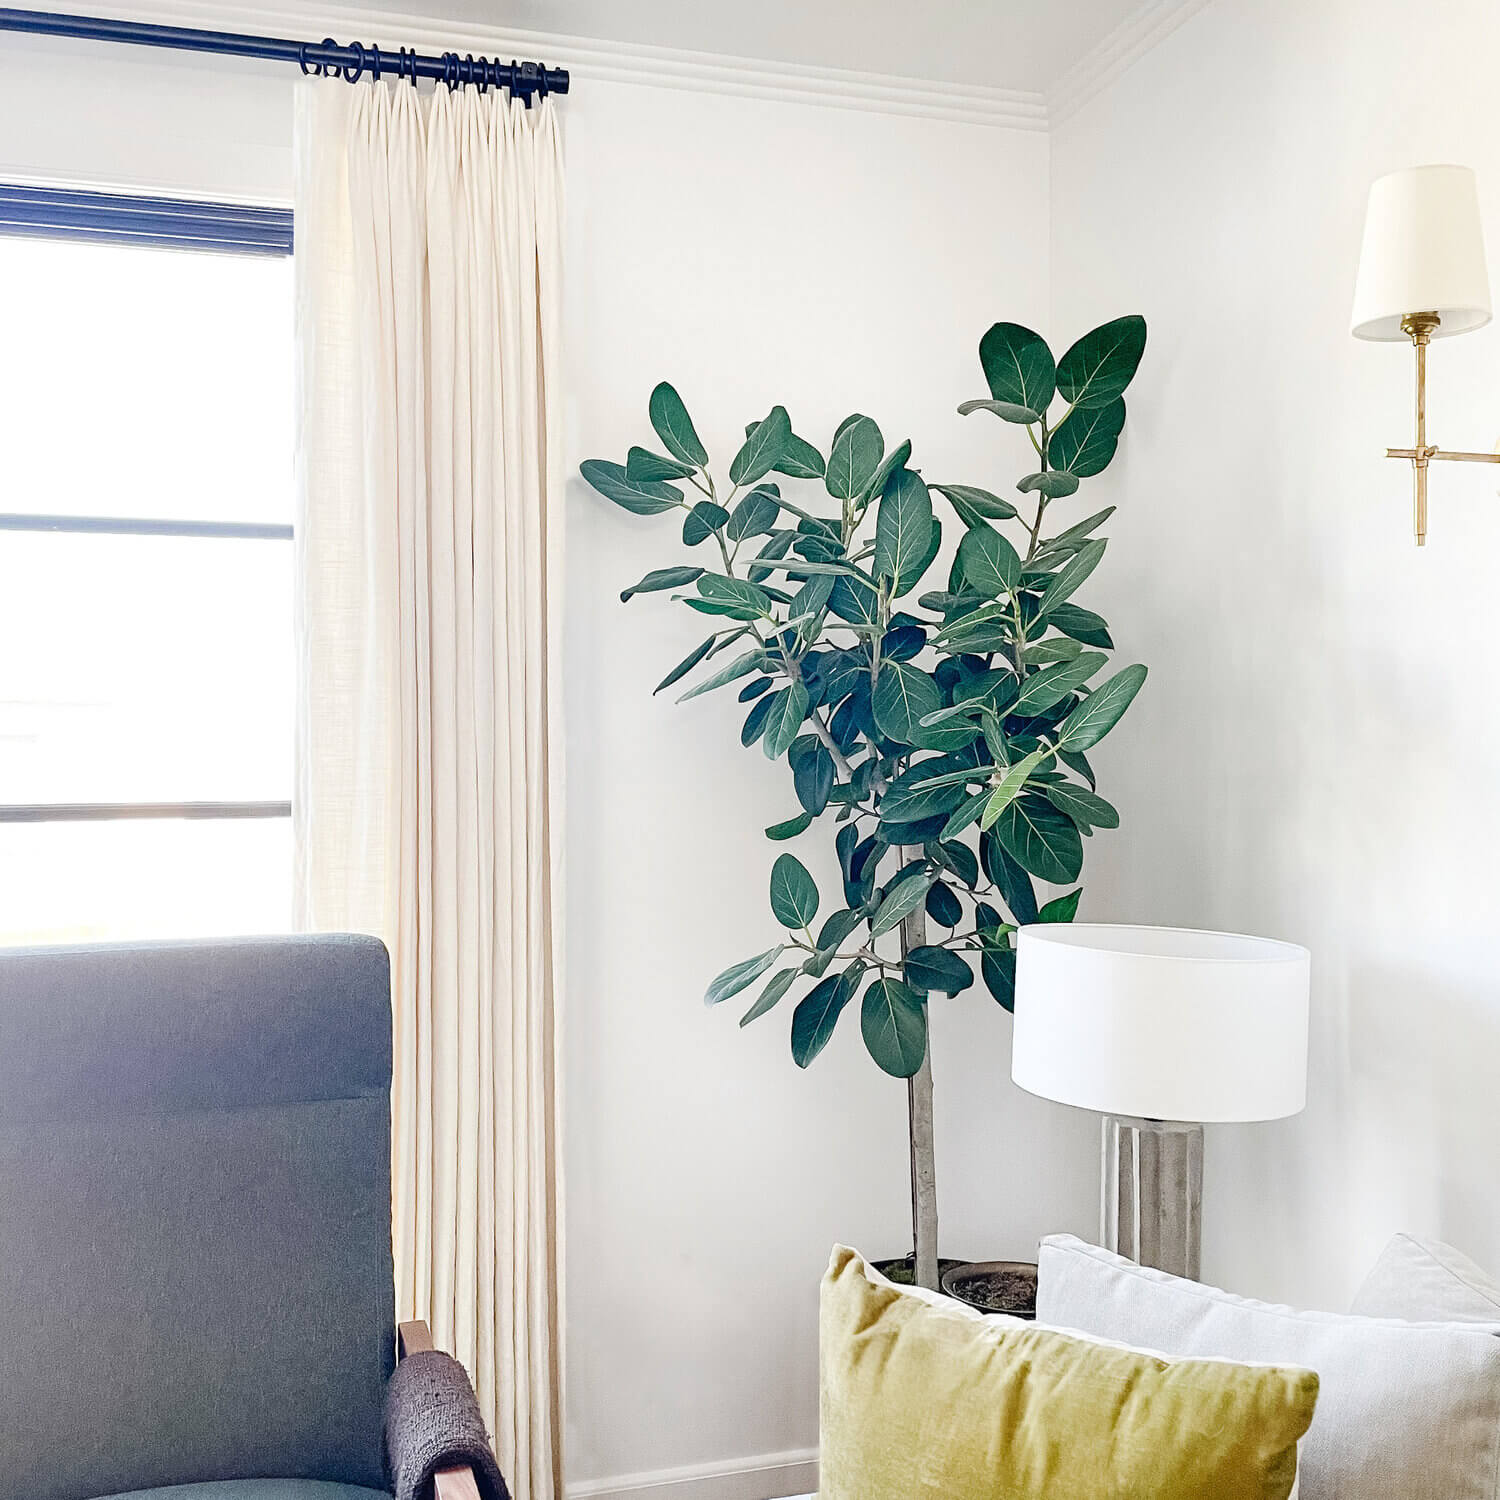 Curtain Rod + Rings Dupe / Ficus Audrey Tree / Wall Sconce / Lamp / Throw Pillow / Recliner / Couch